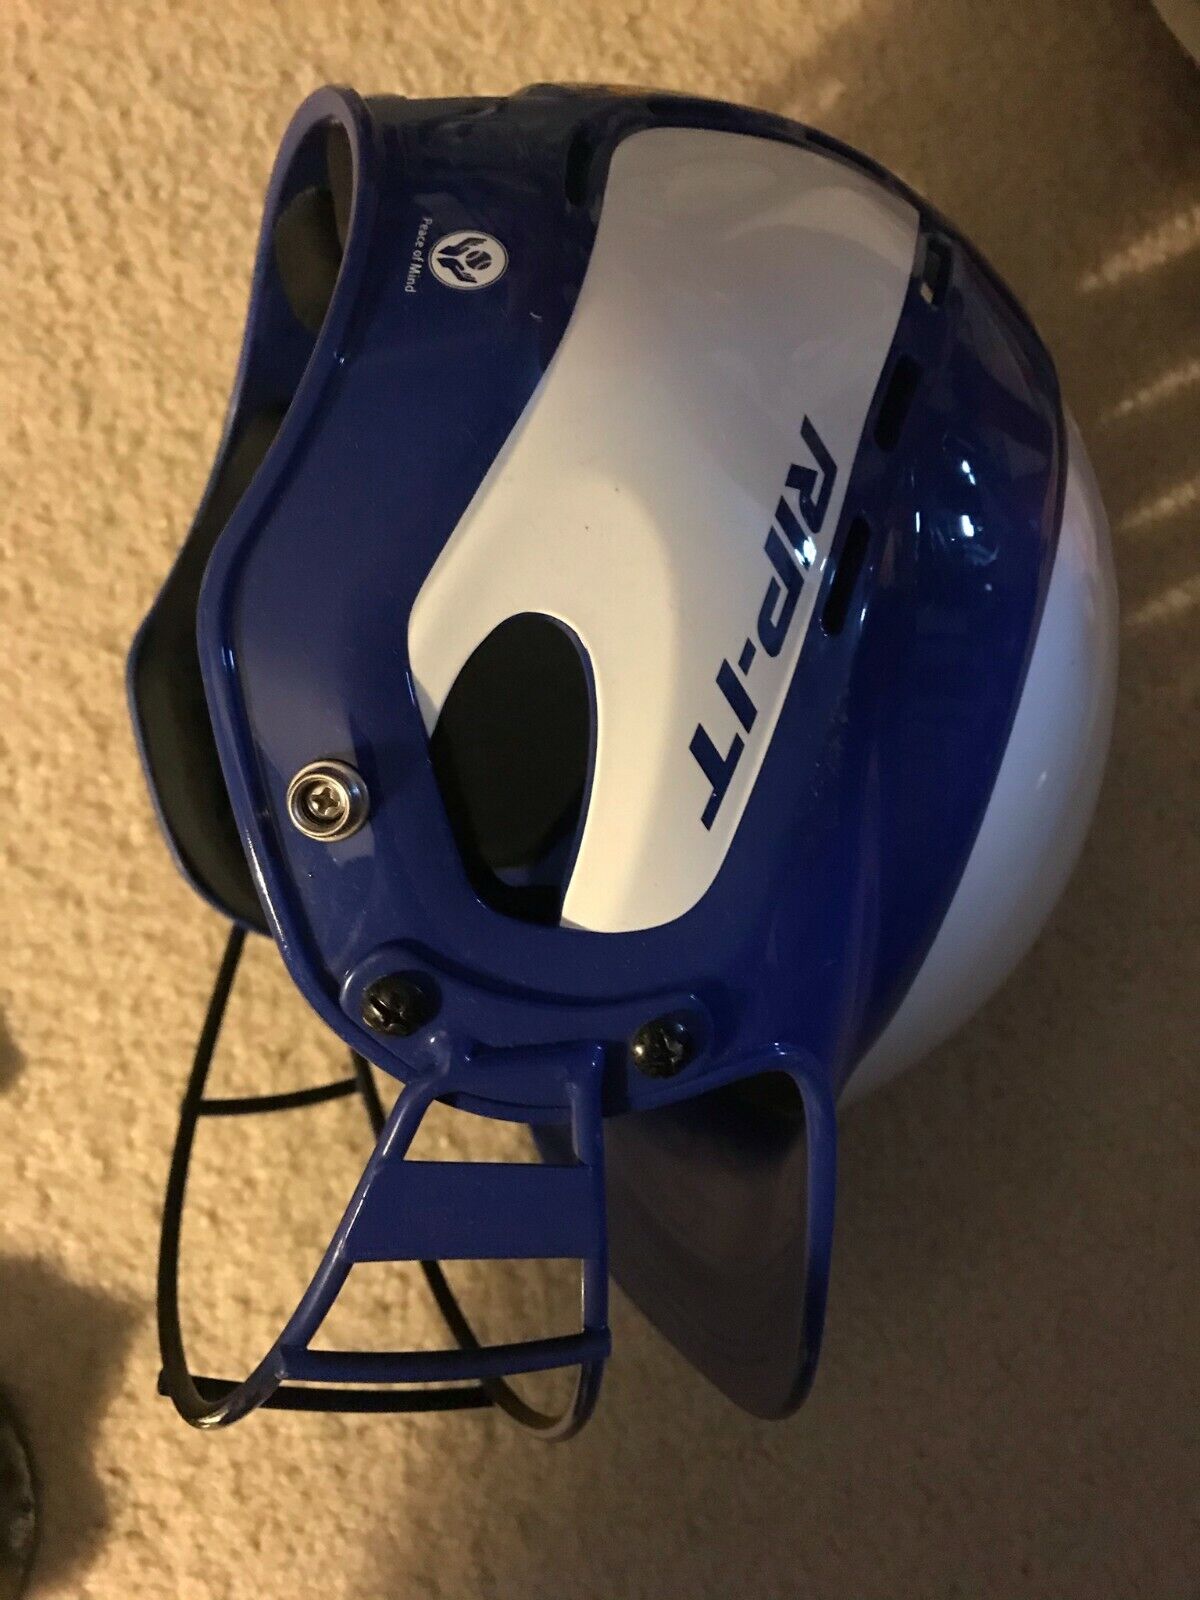 BASEBALL HELMET RIP-IT with face mask SIZE XL 7 1/4 +